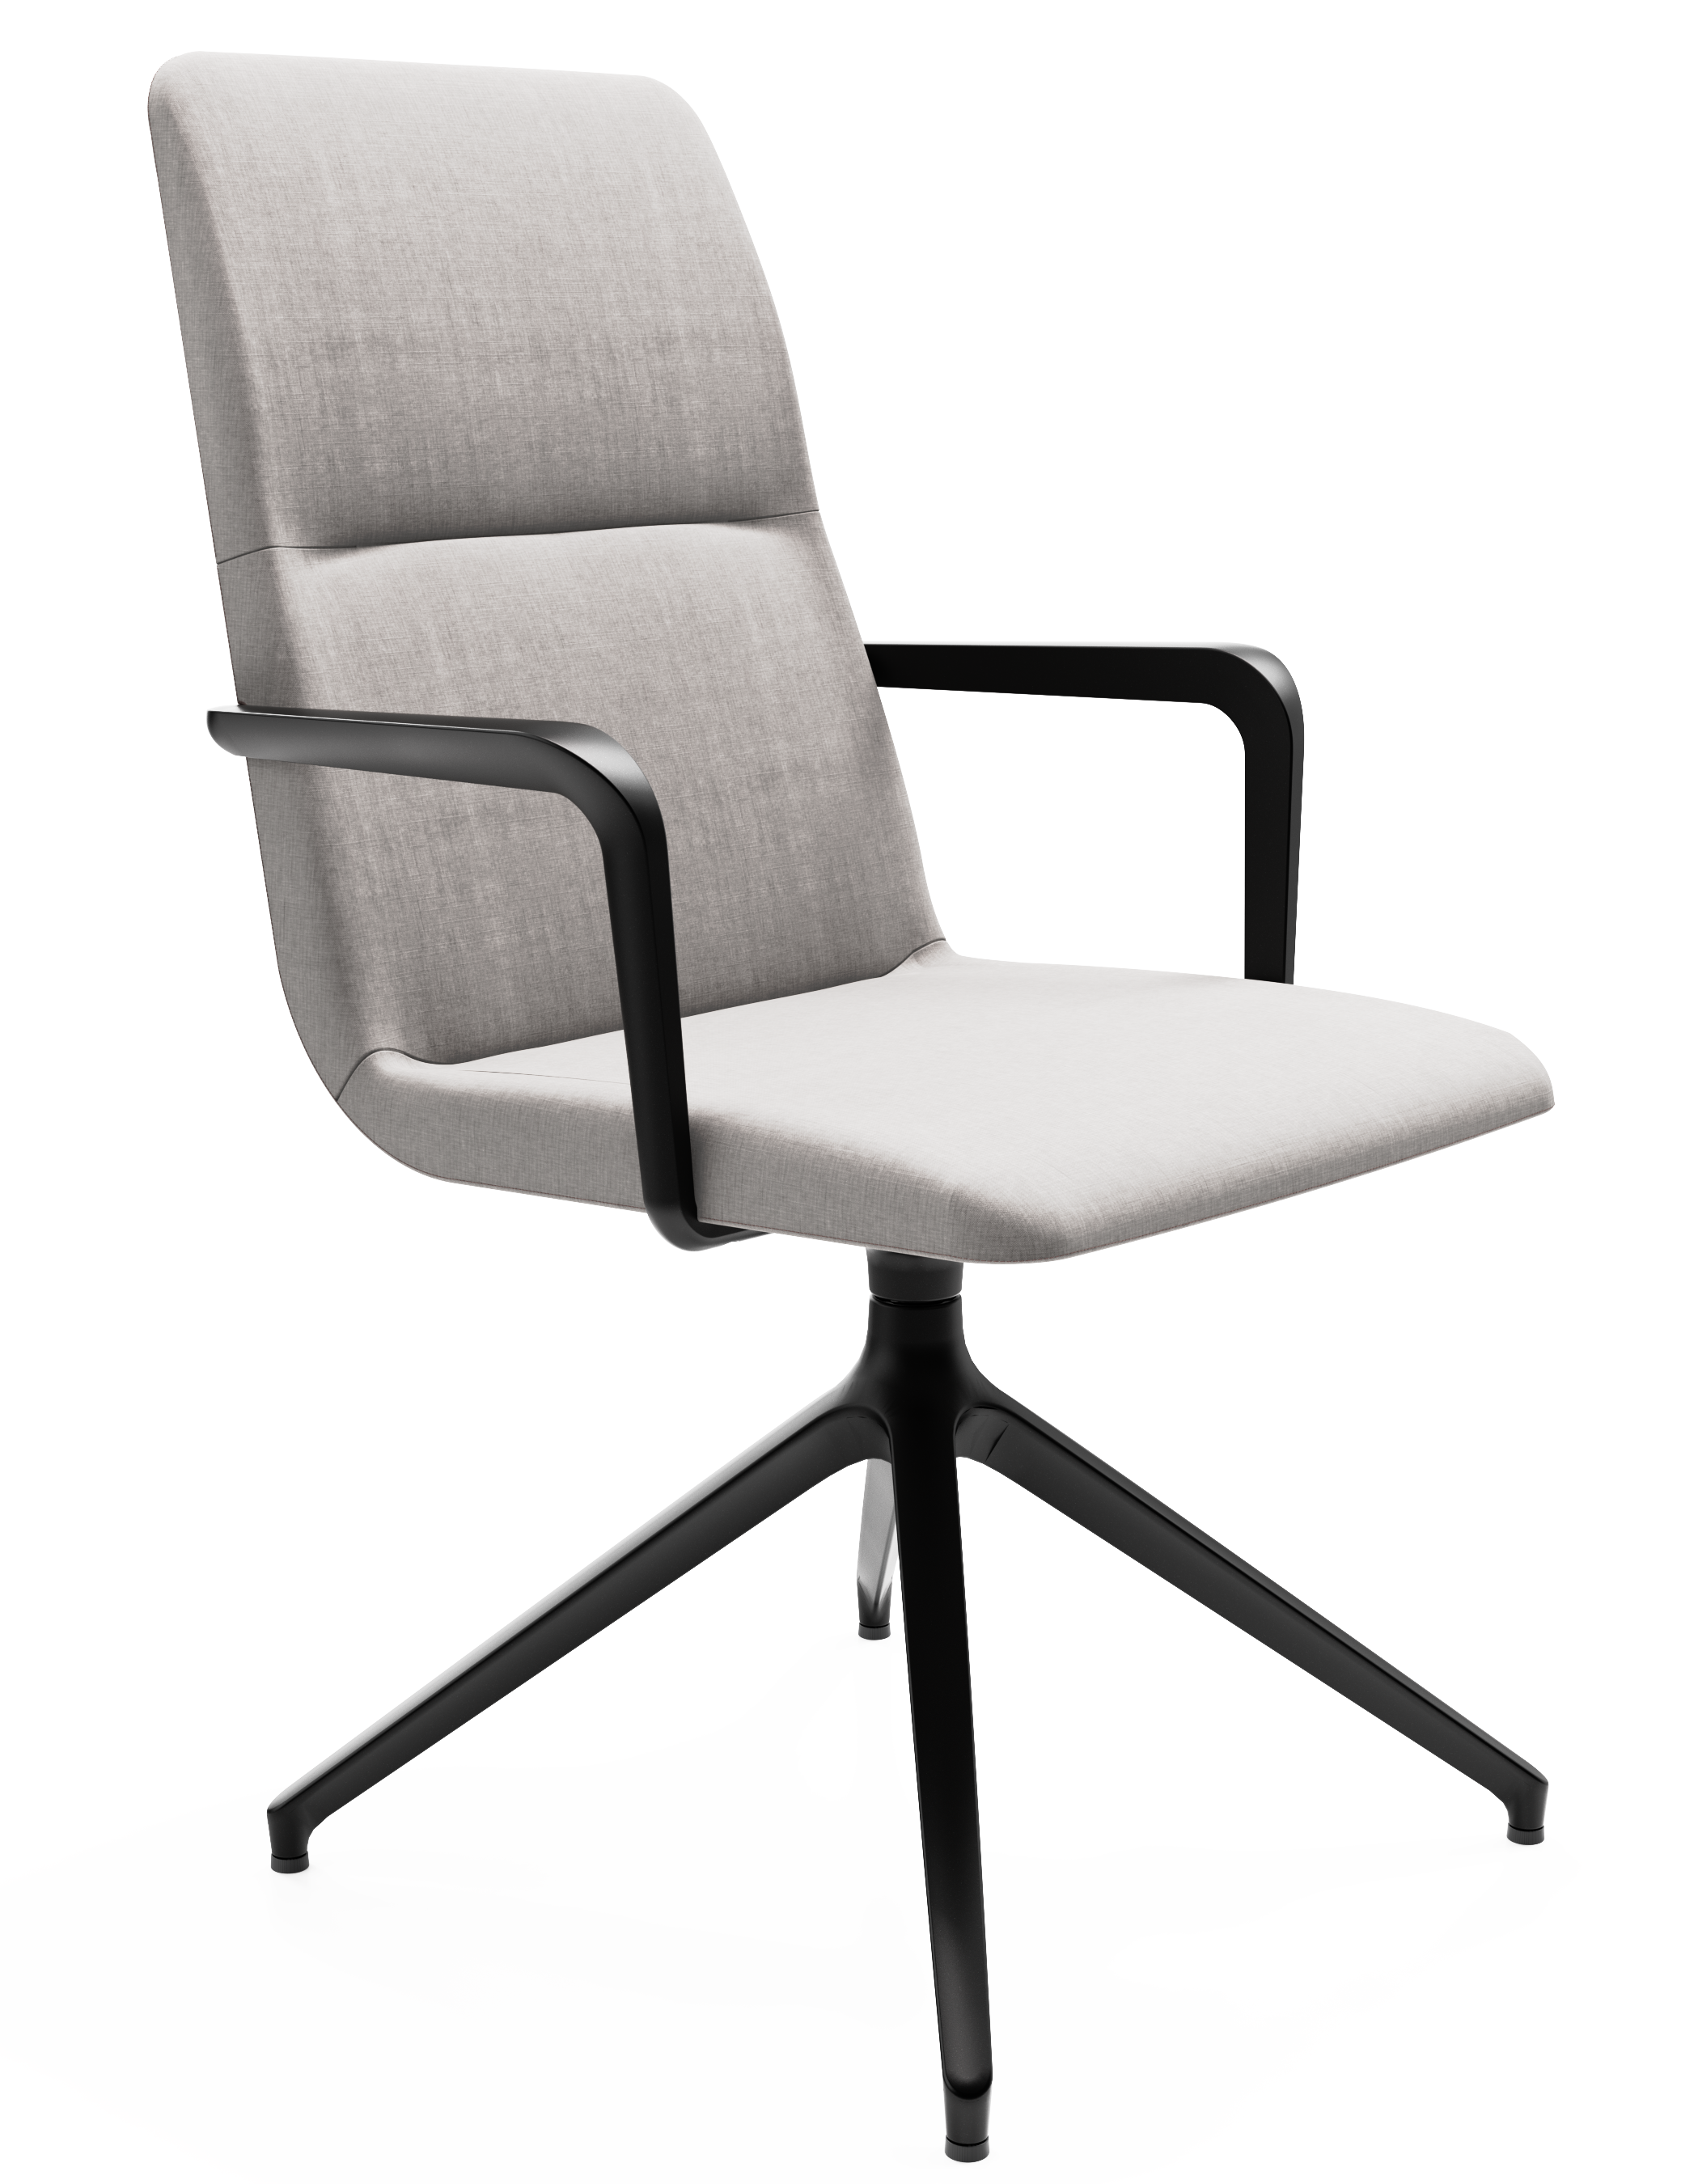 WS - Accord with arms 4 star pyramid base chair - black - remix 126 - front angle